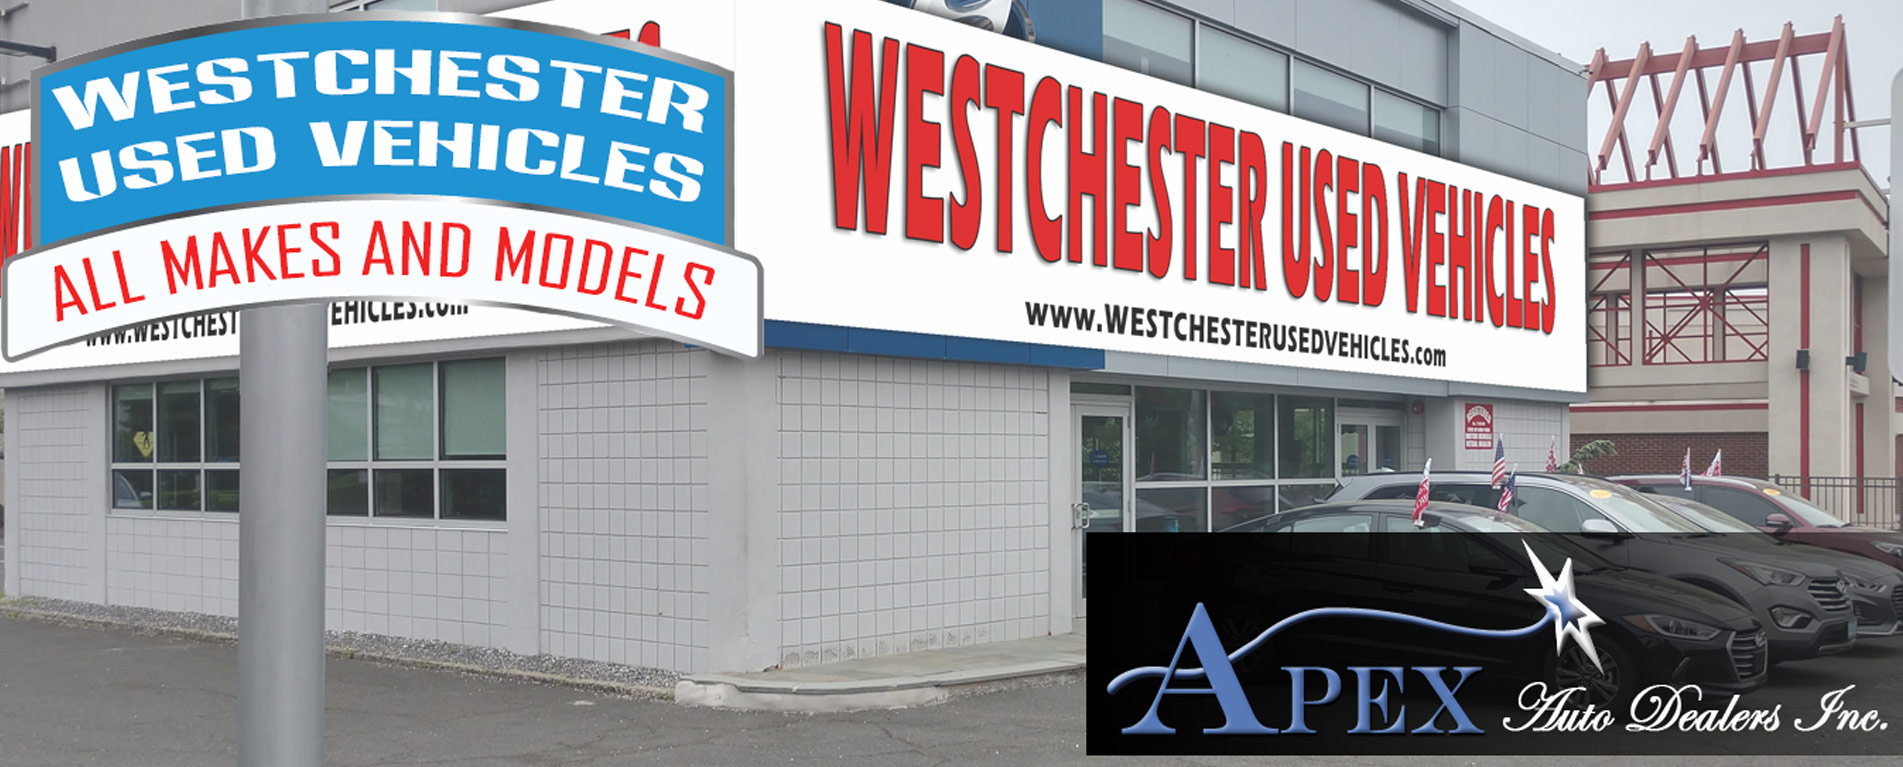 Used cars for sale in White Plains | Apex Westchester Used Vehicles. White Plains NY